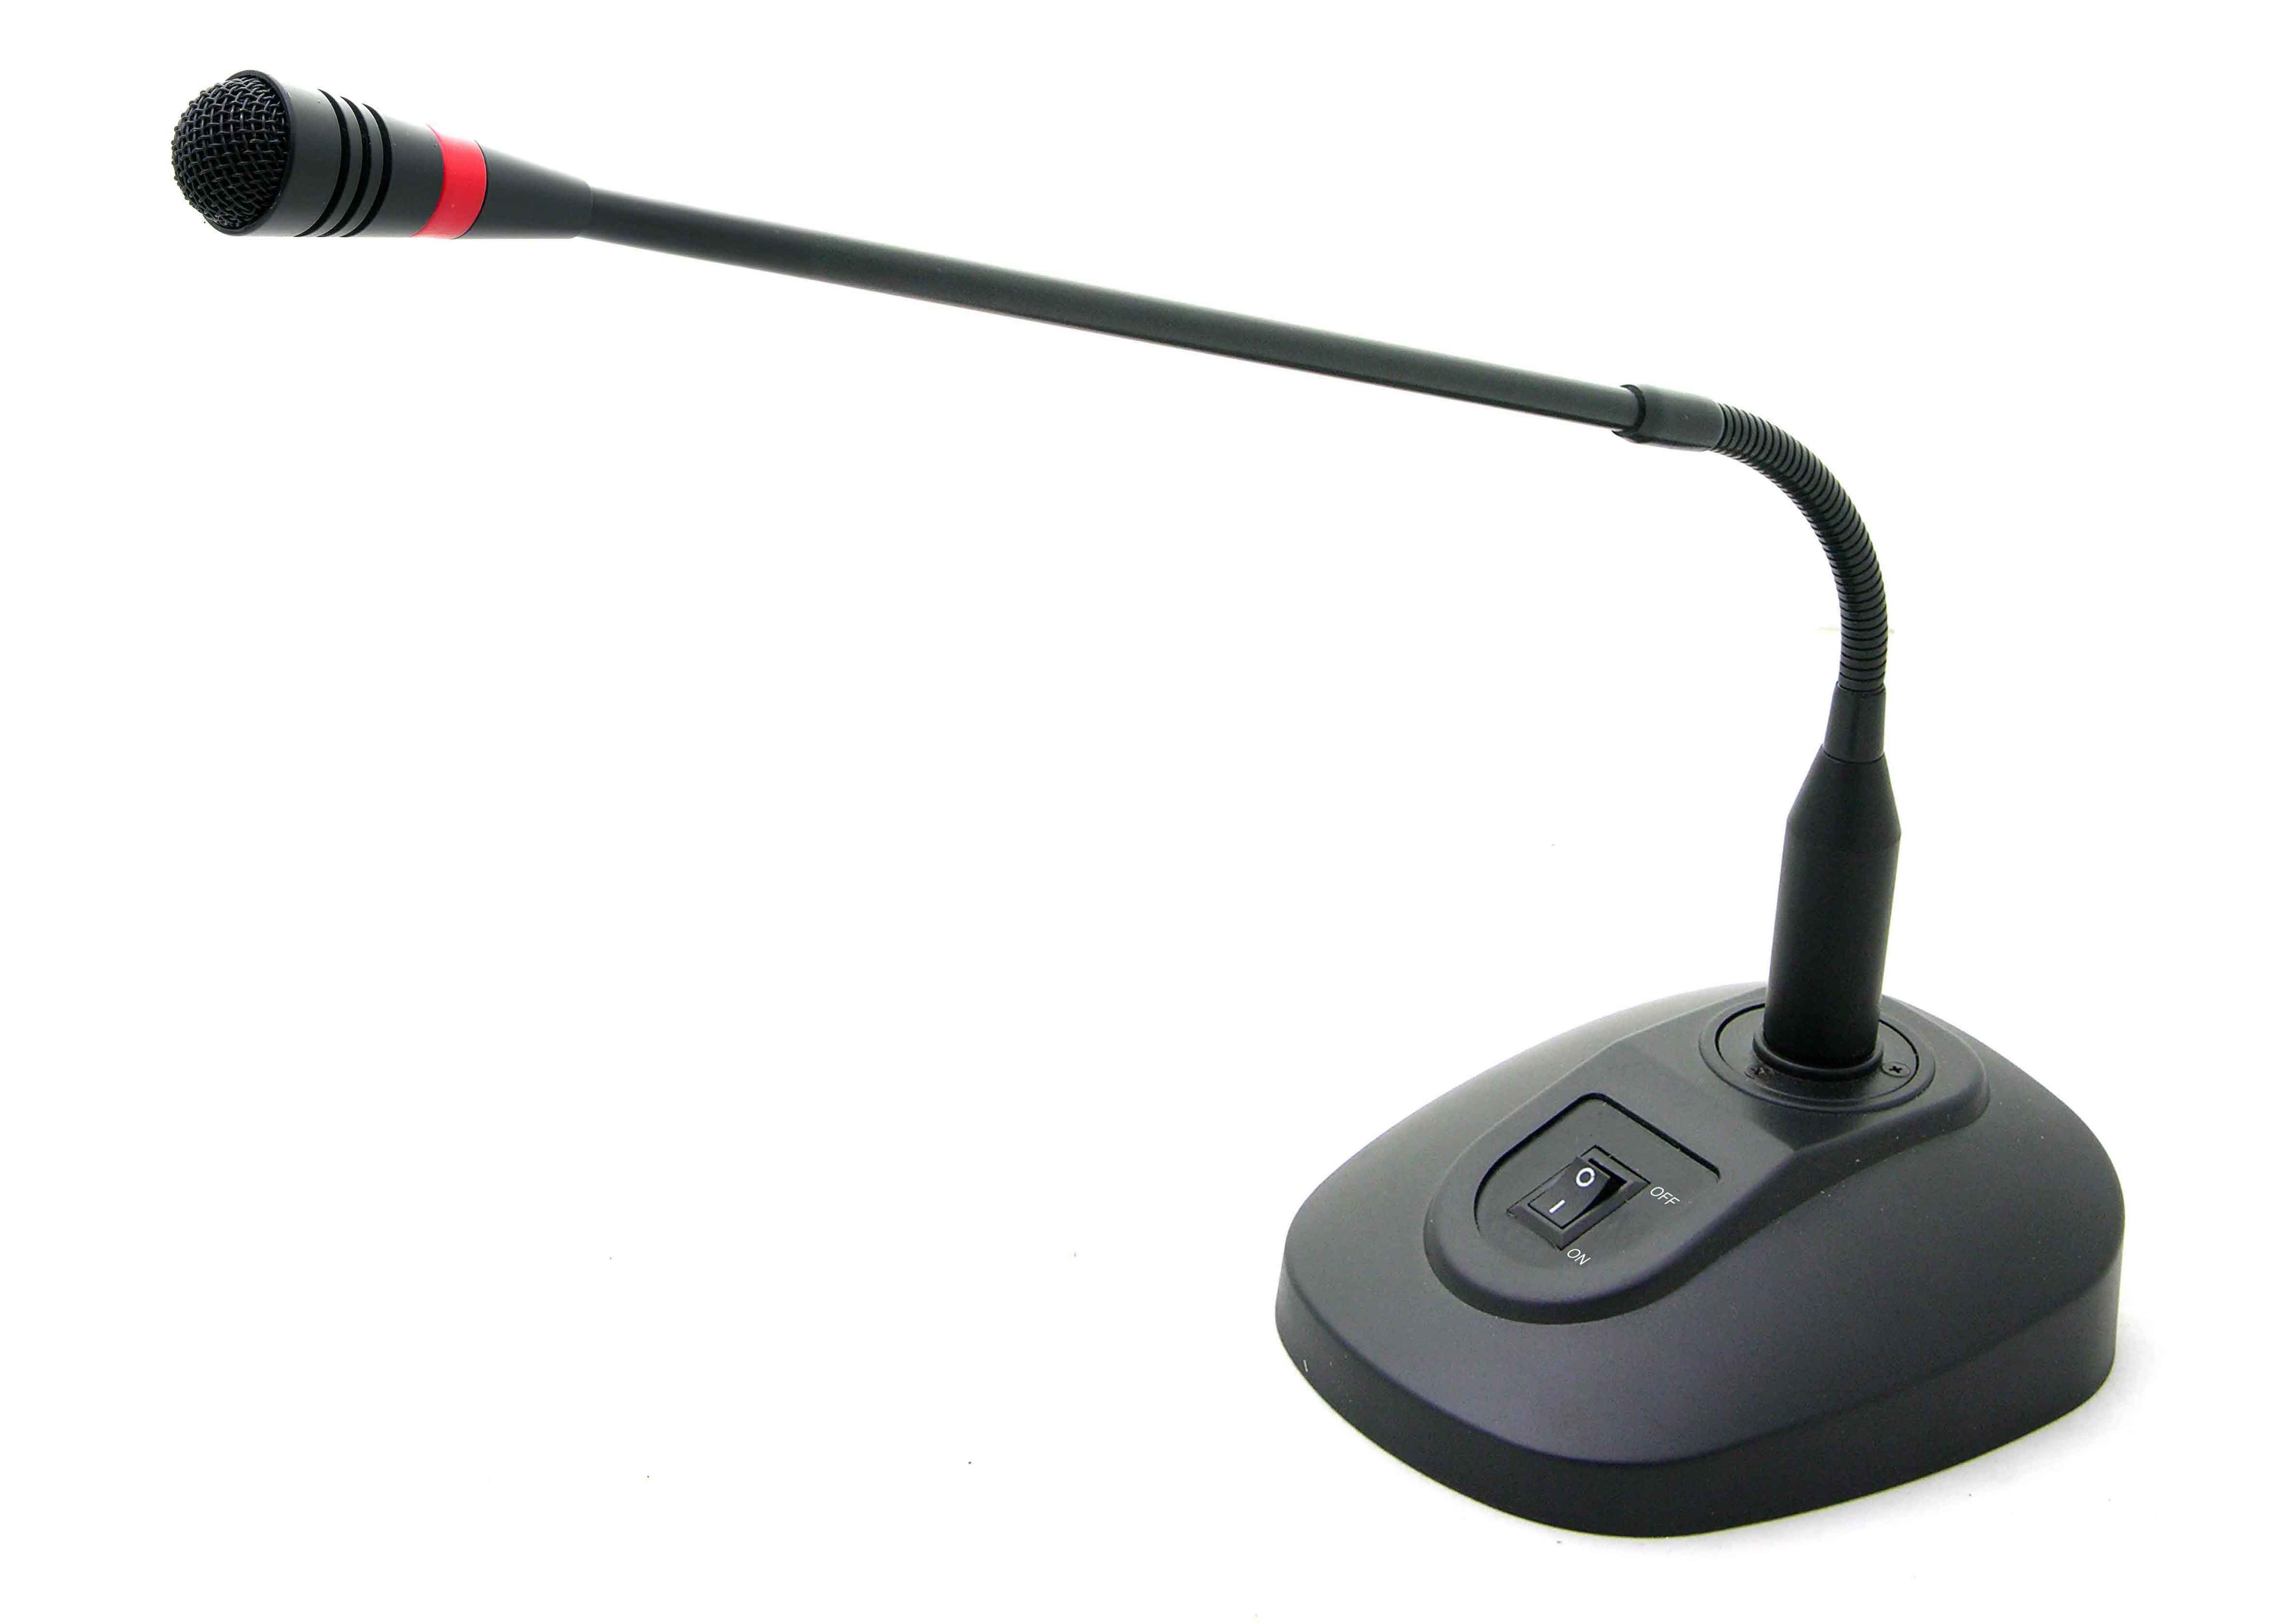 Professional conference microphone